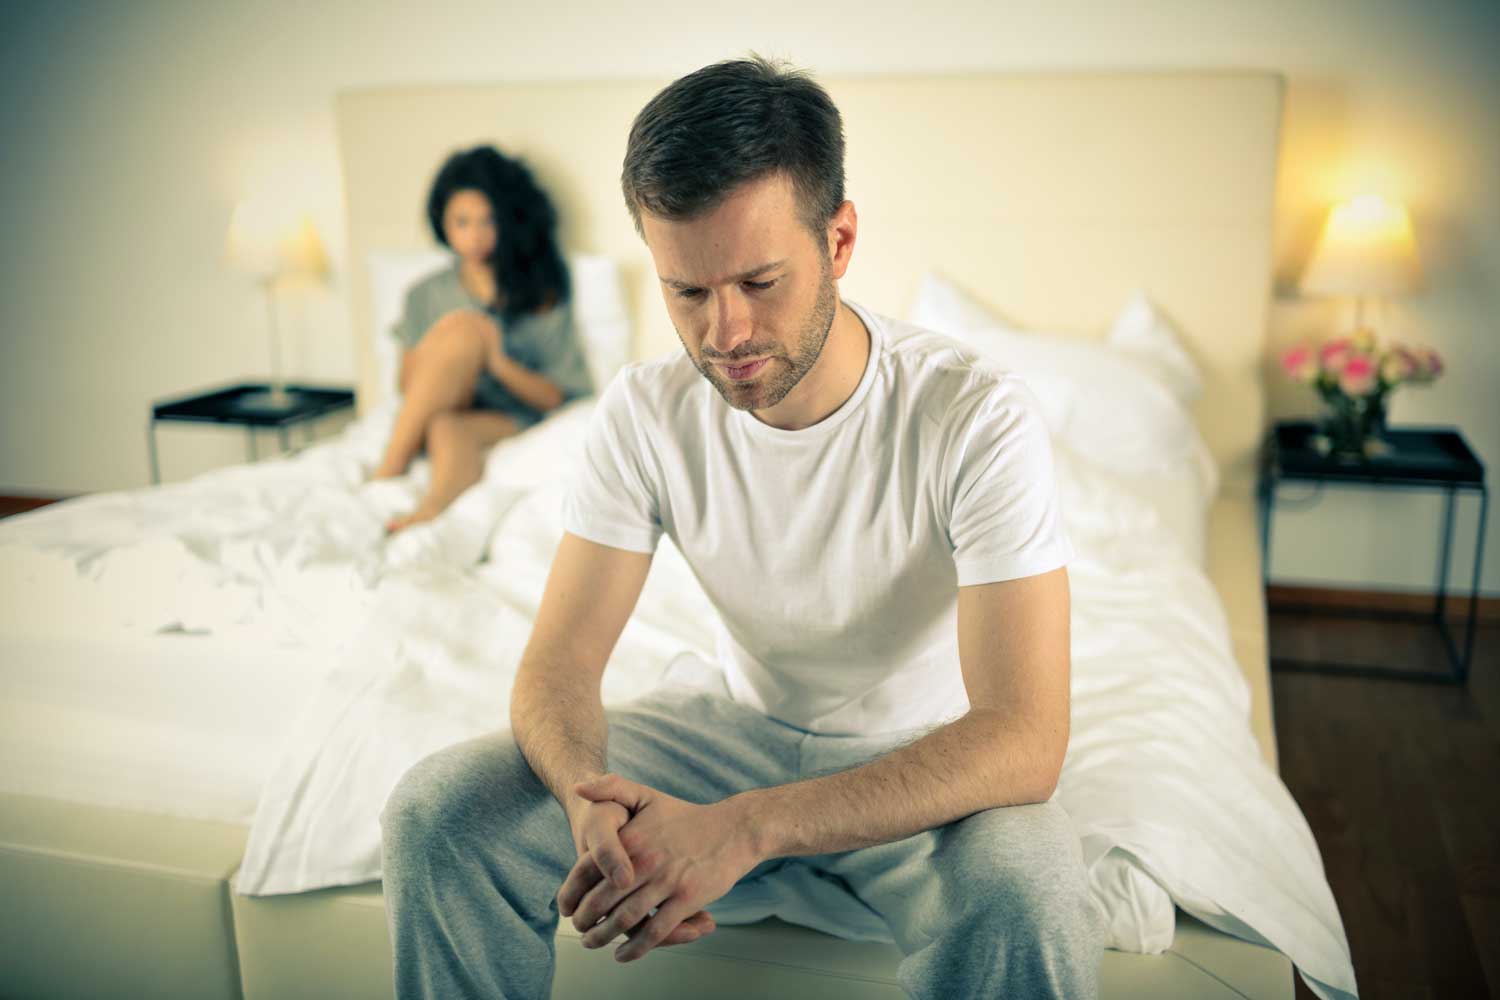 Erectile Dysfunction Causes Treatment And A Future For Free